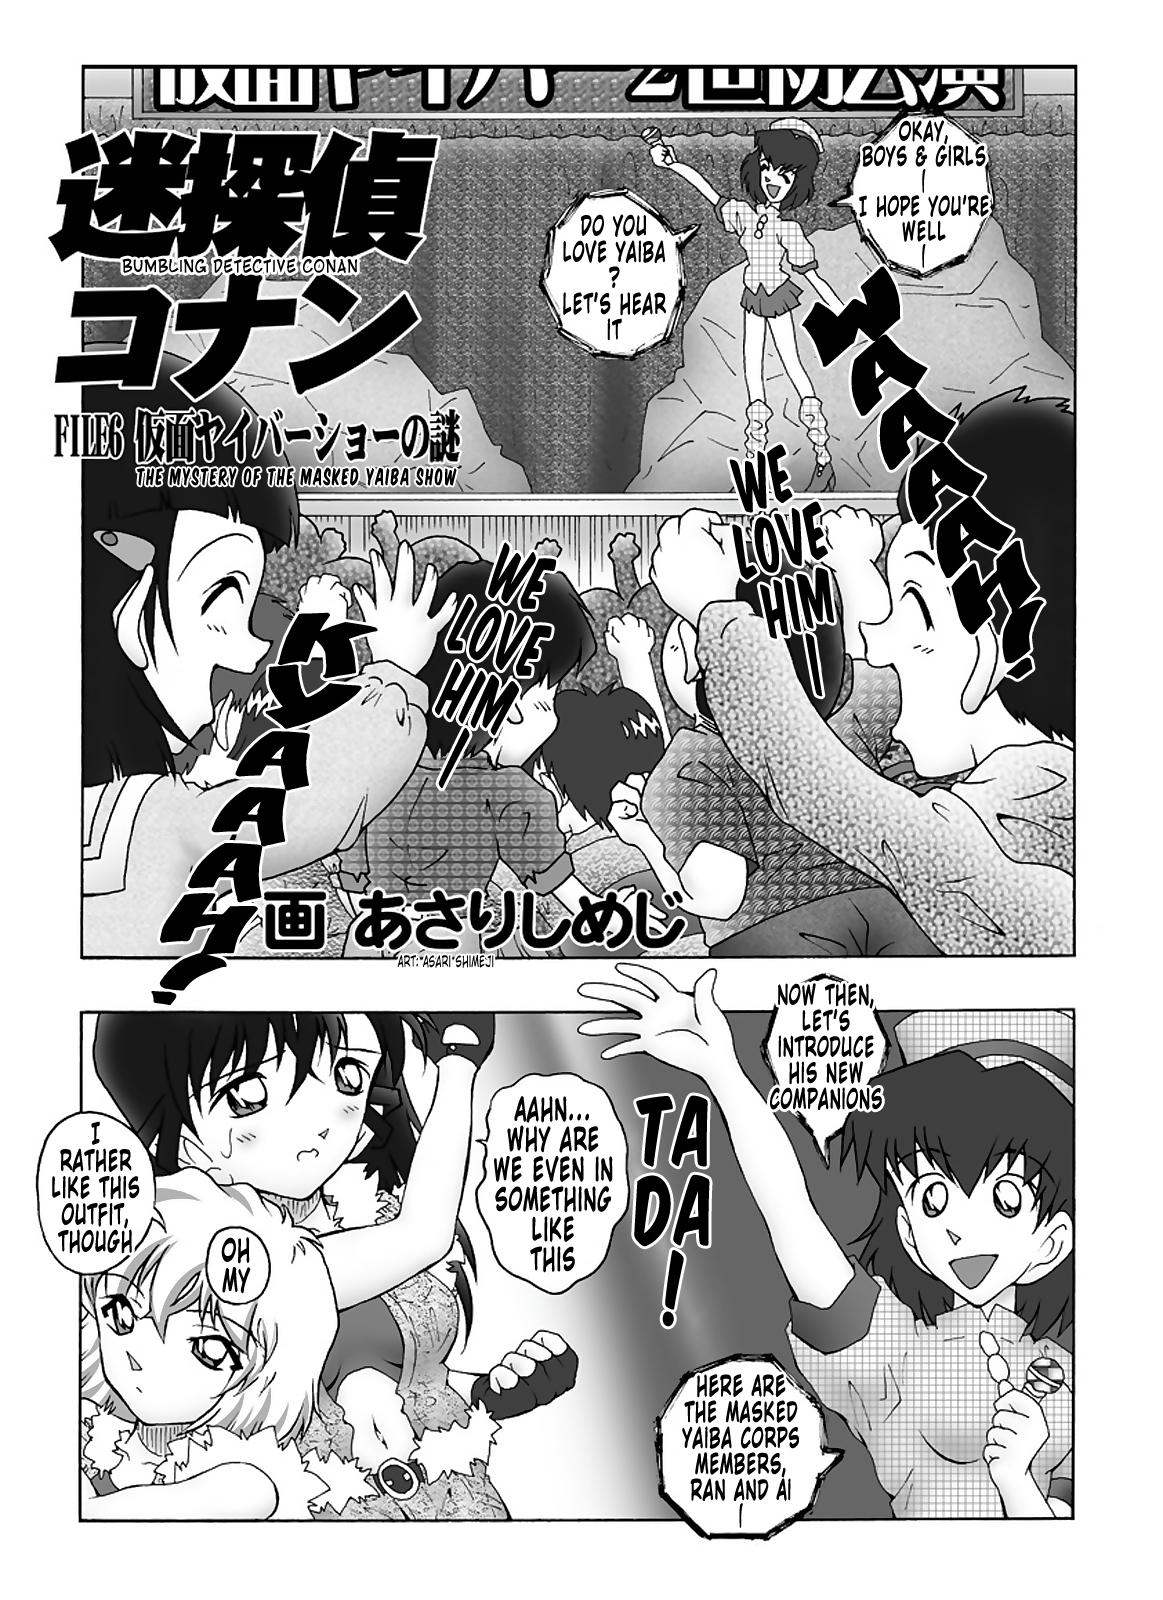 Webcamchat Bumbling Detective Conan - File 6: The Mystery Of The Masked Yaiba Show - Detective conan Cums - Page 4